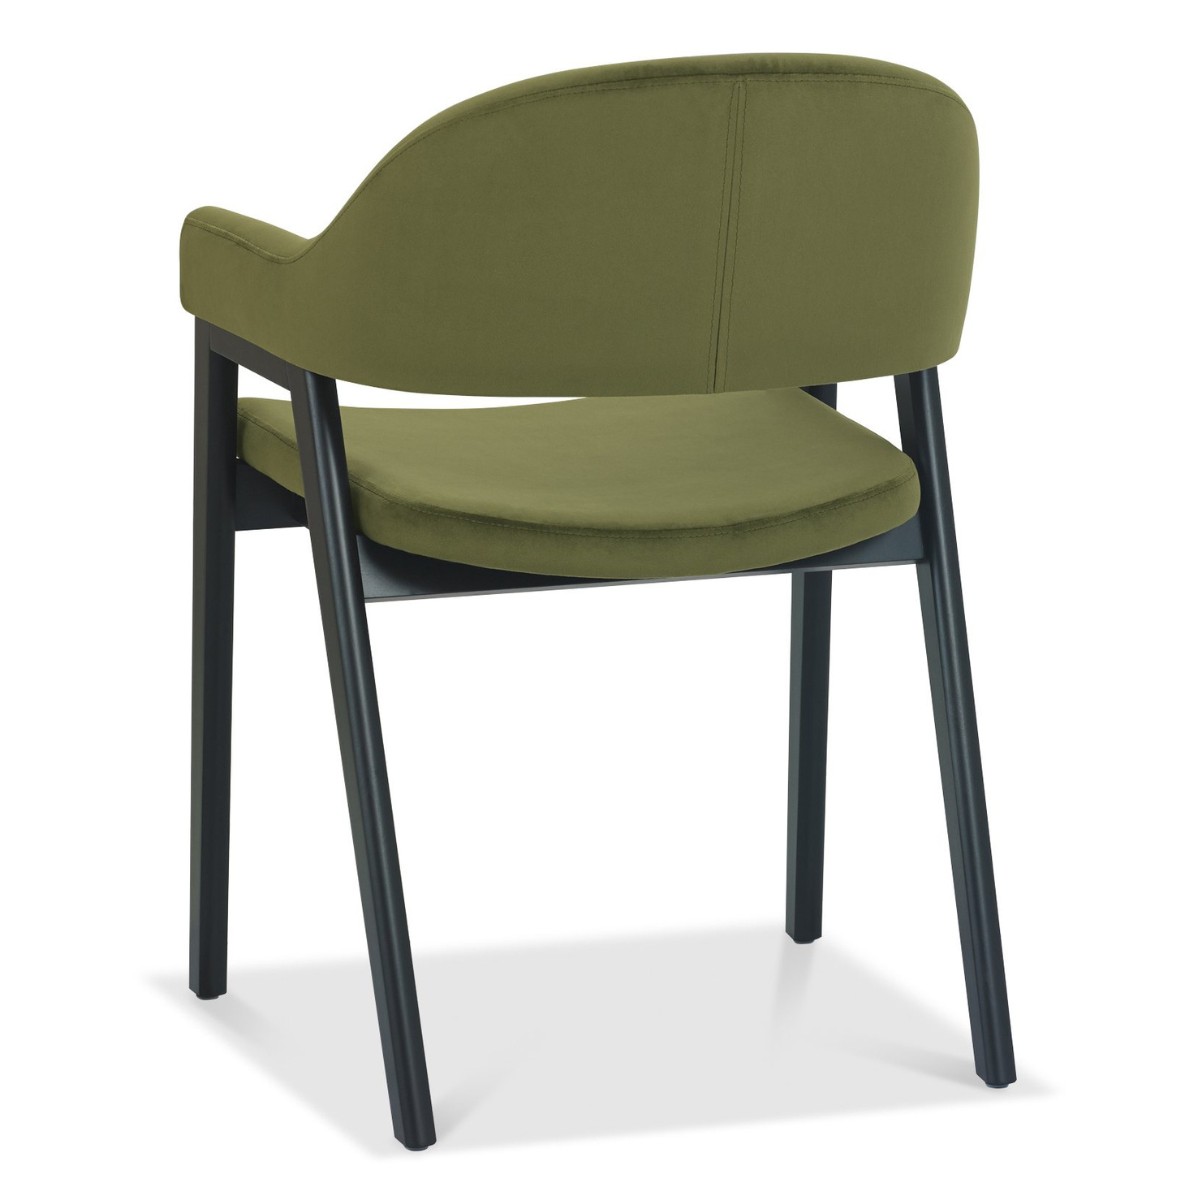 Chambery Weathered Oak Curved Back Dining Chair Green- 3